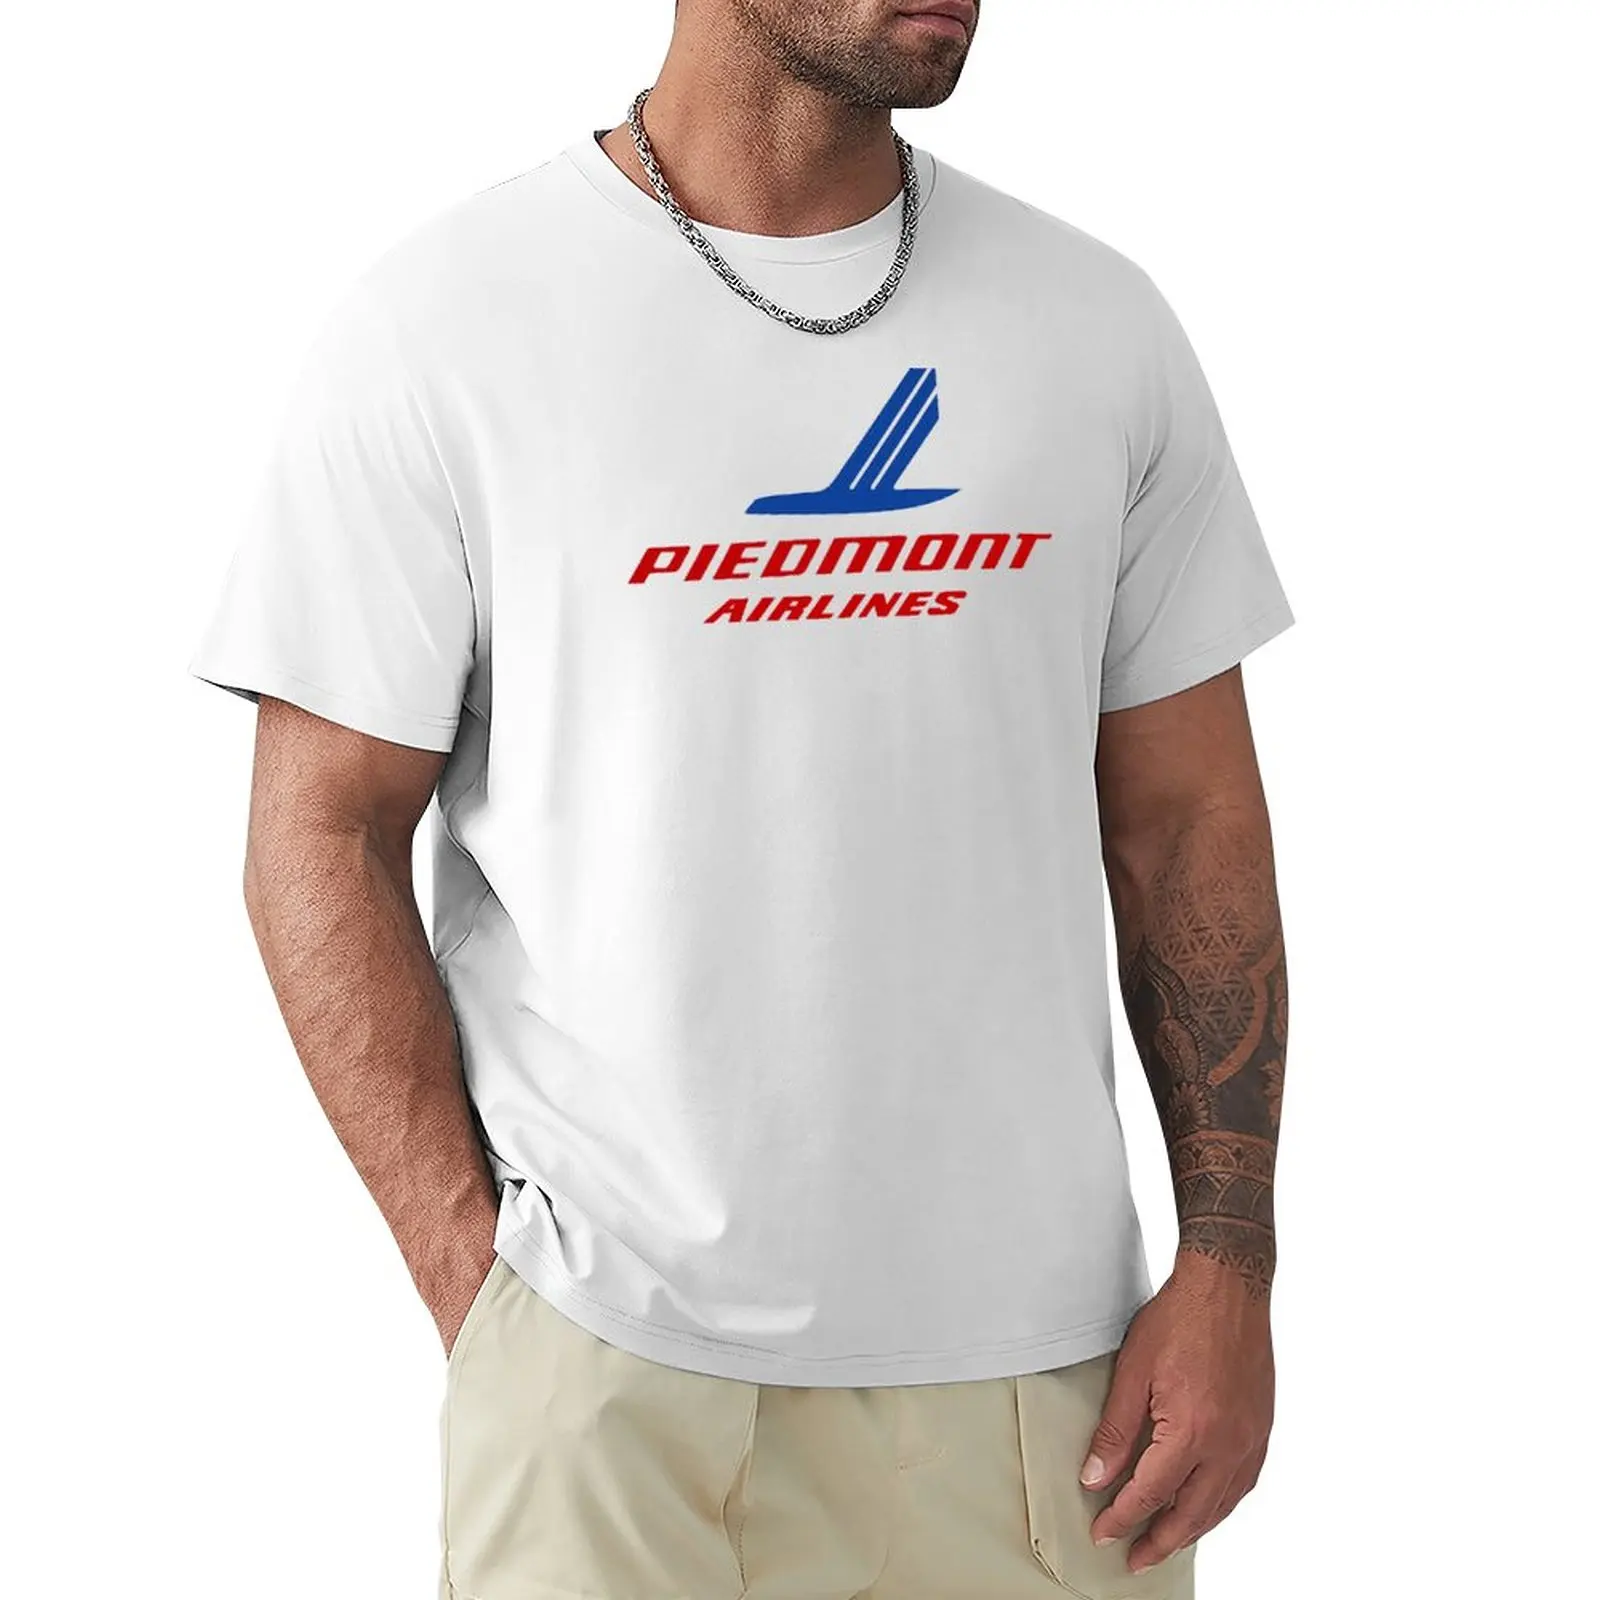 

Piedmont airlines T-Shirt custom t shirts design your own hippie clothes sweat shirt blank t shirts t shirt for men